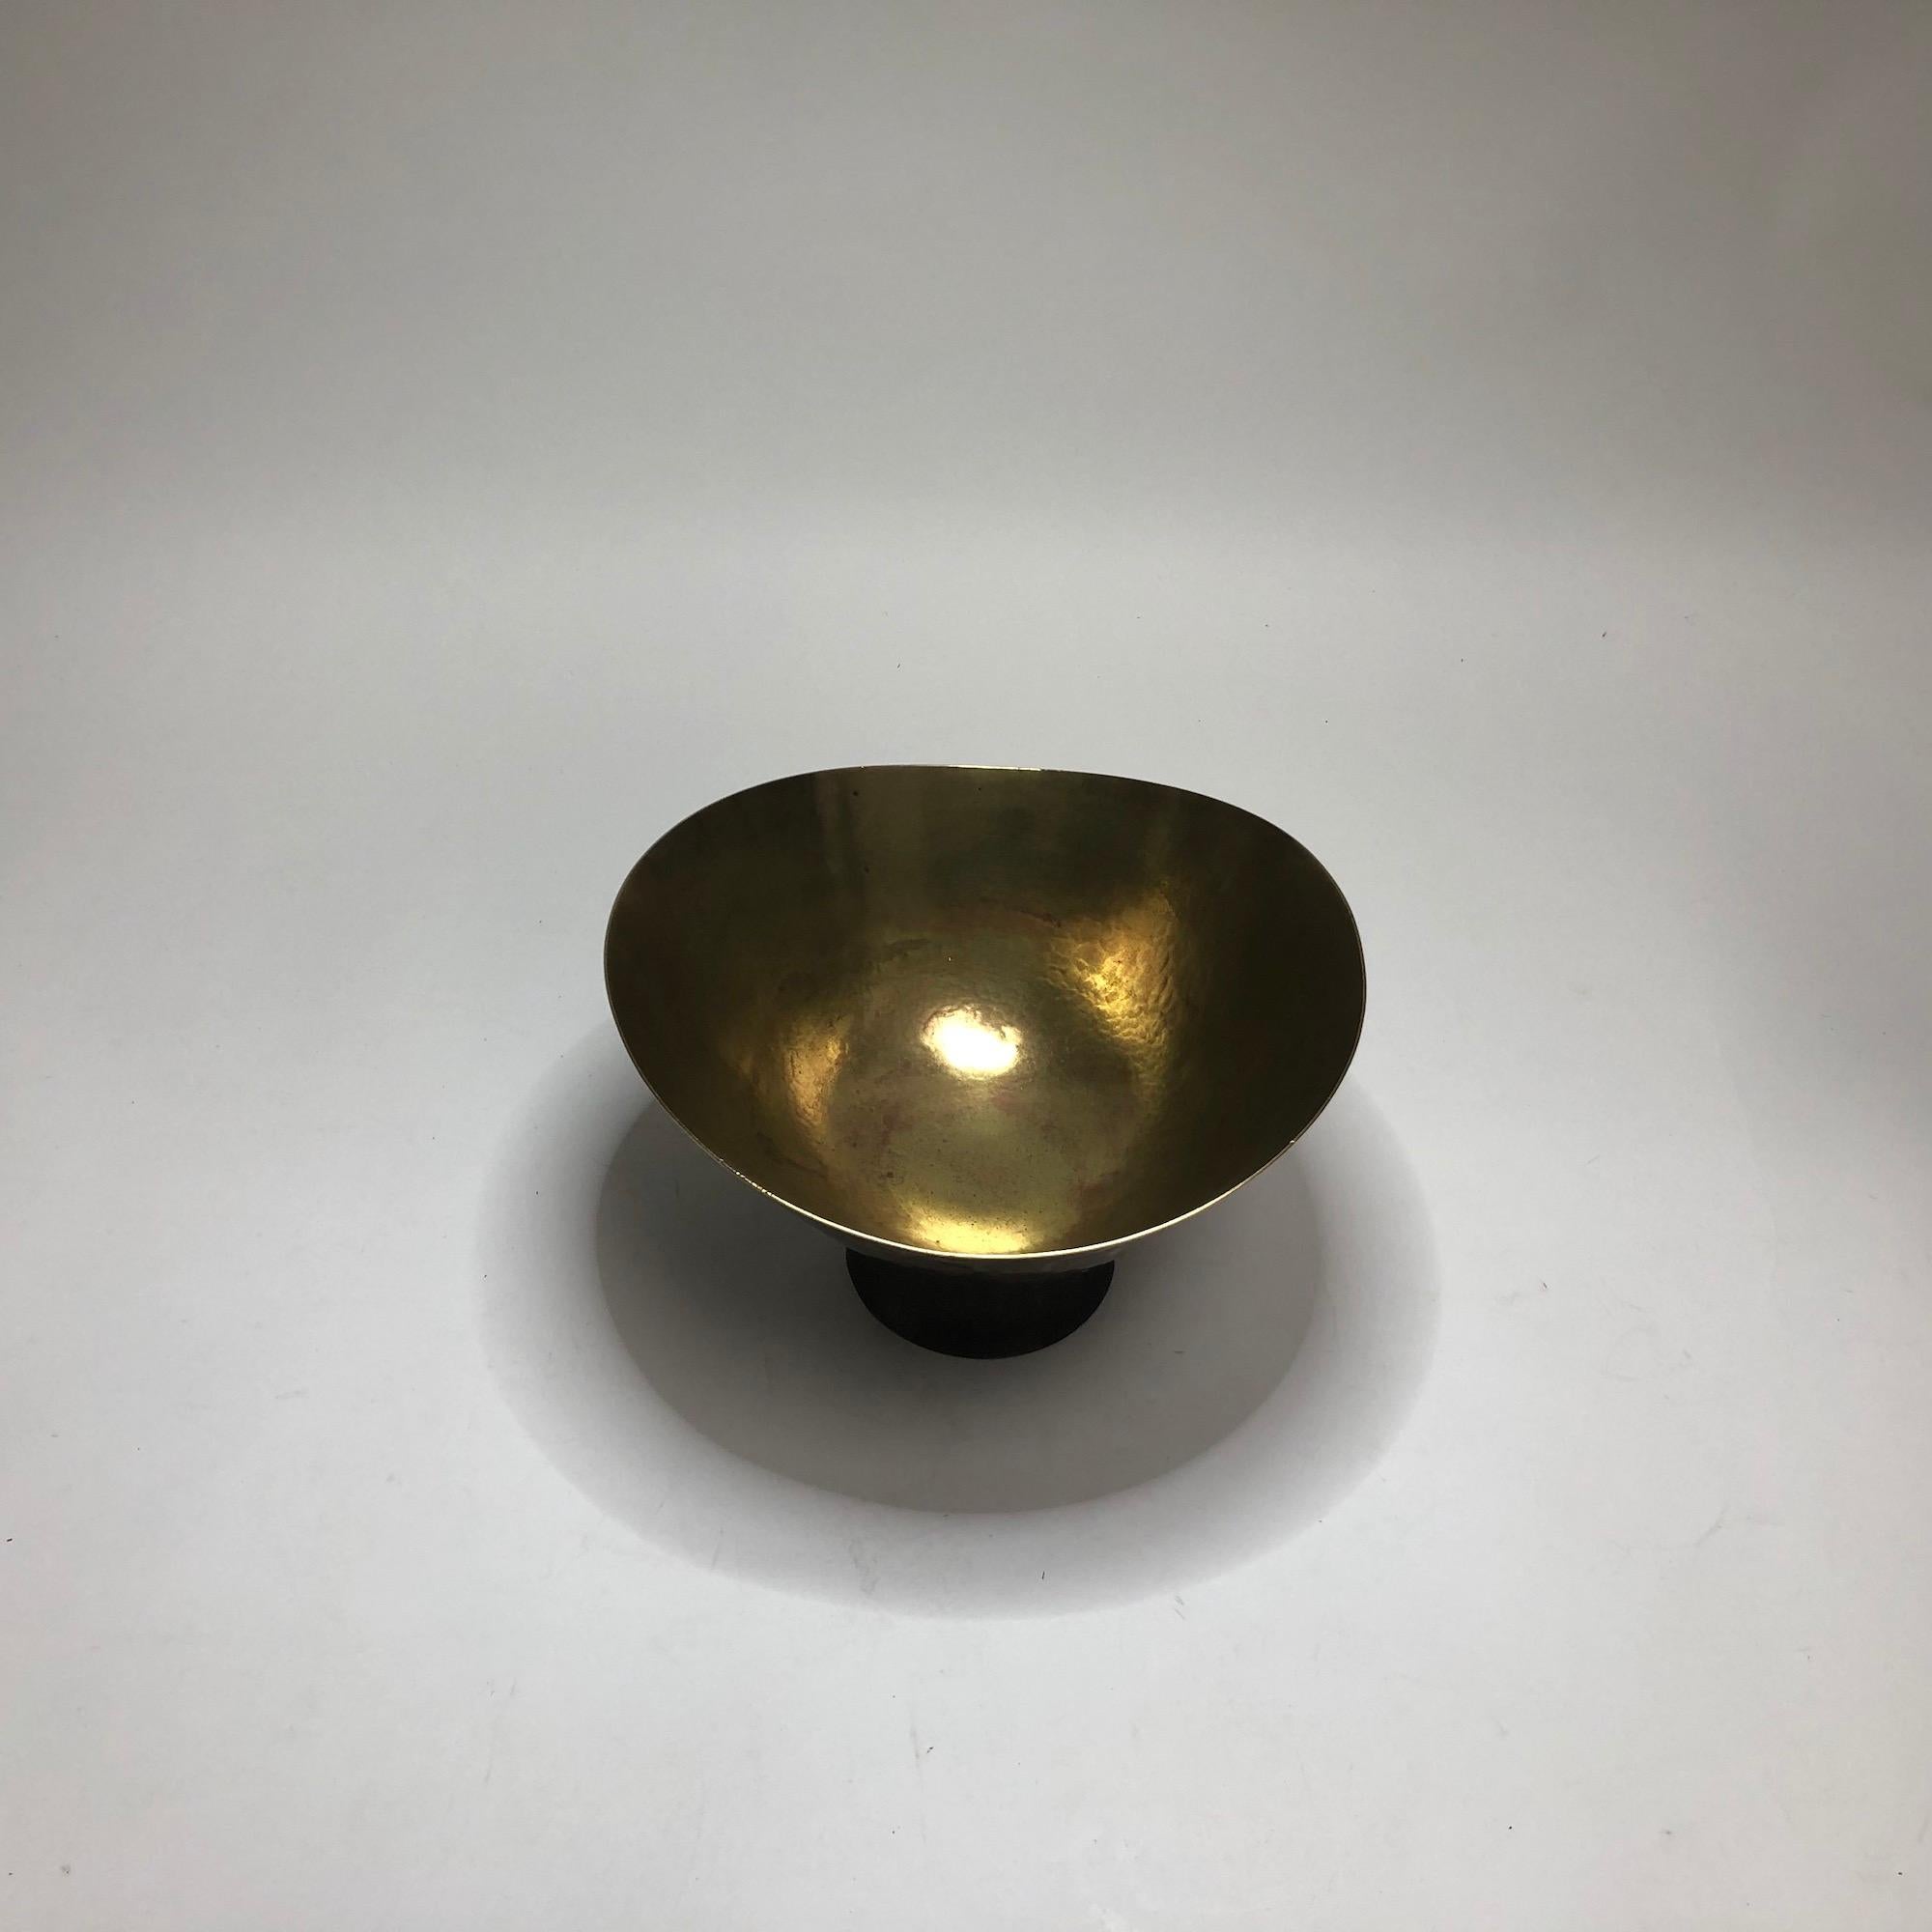 Very nice, rare and original footed bowl from Hayno Focken. German Bauhaus 30th Art Deco hammered brass bowl with model number 2019. Signed on the underside with 